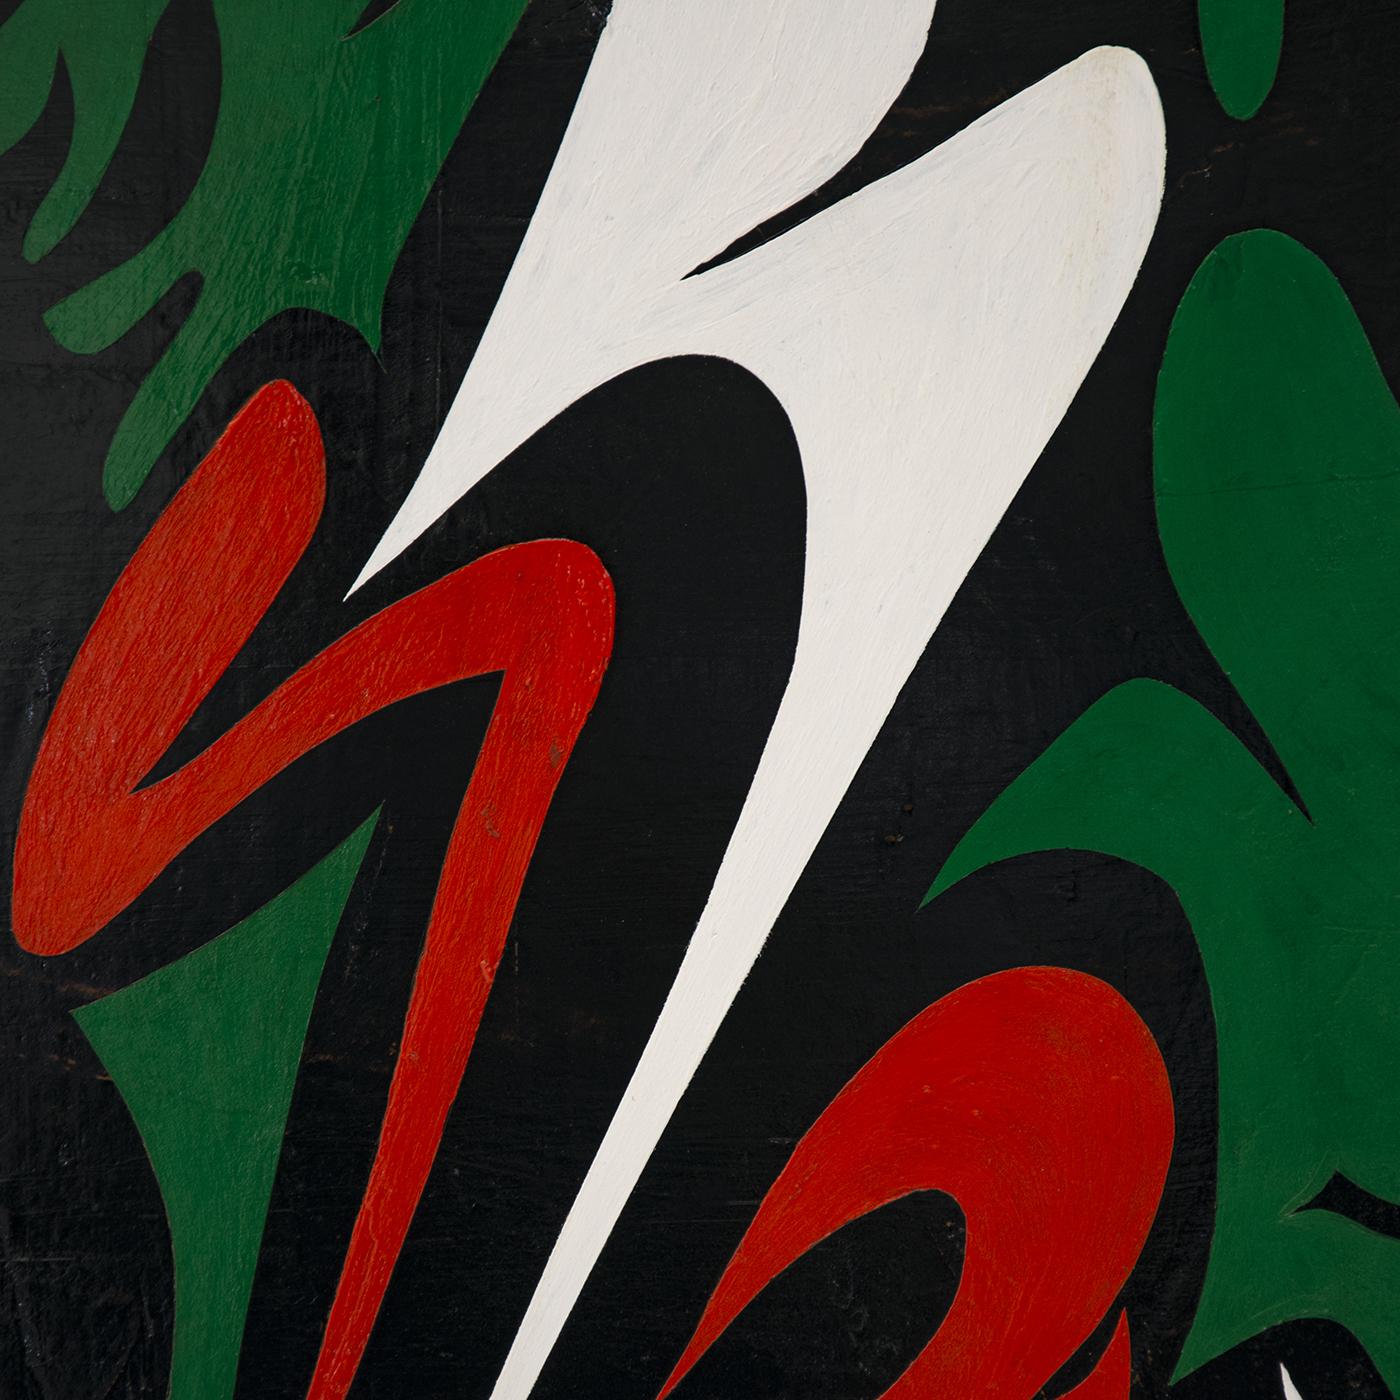 A unique display of dark green, red, white and black hues exquisitely mark this abstract wall panel. Distinguished by a stunning graphic quality, the piece is entirely handpainted in acrylic on a wooden surface, the black outlines between the colors